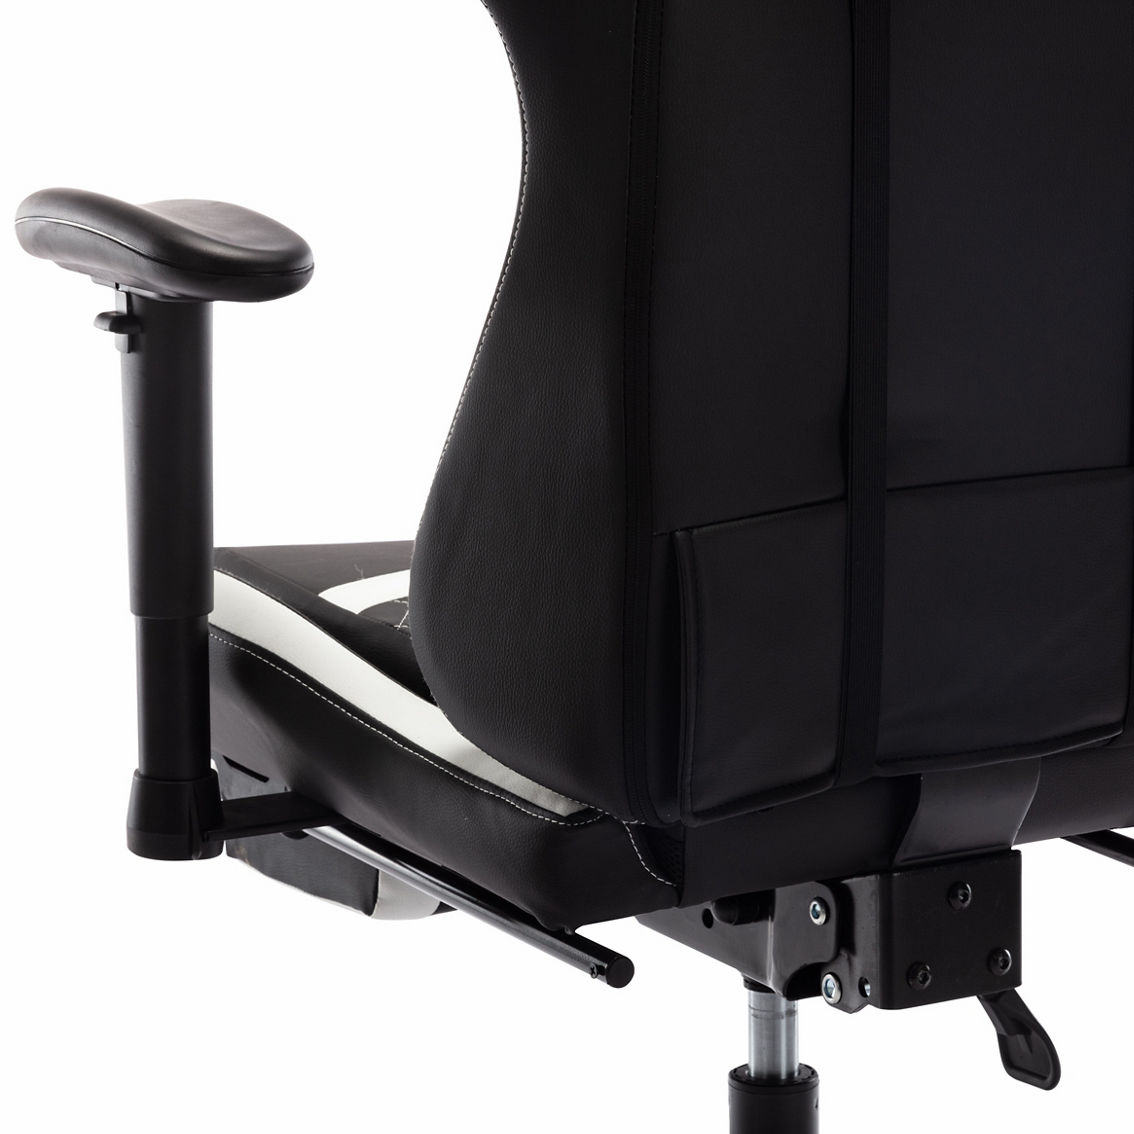 Furniture of America Nosse White Adjustable Gaming Chair - Image 3 of 3